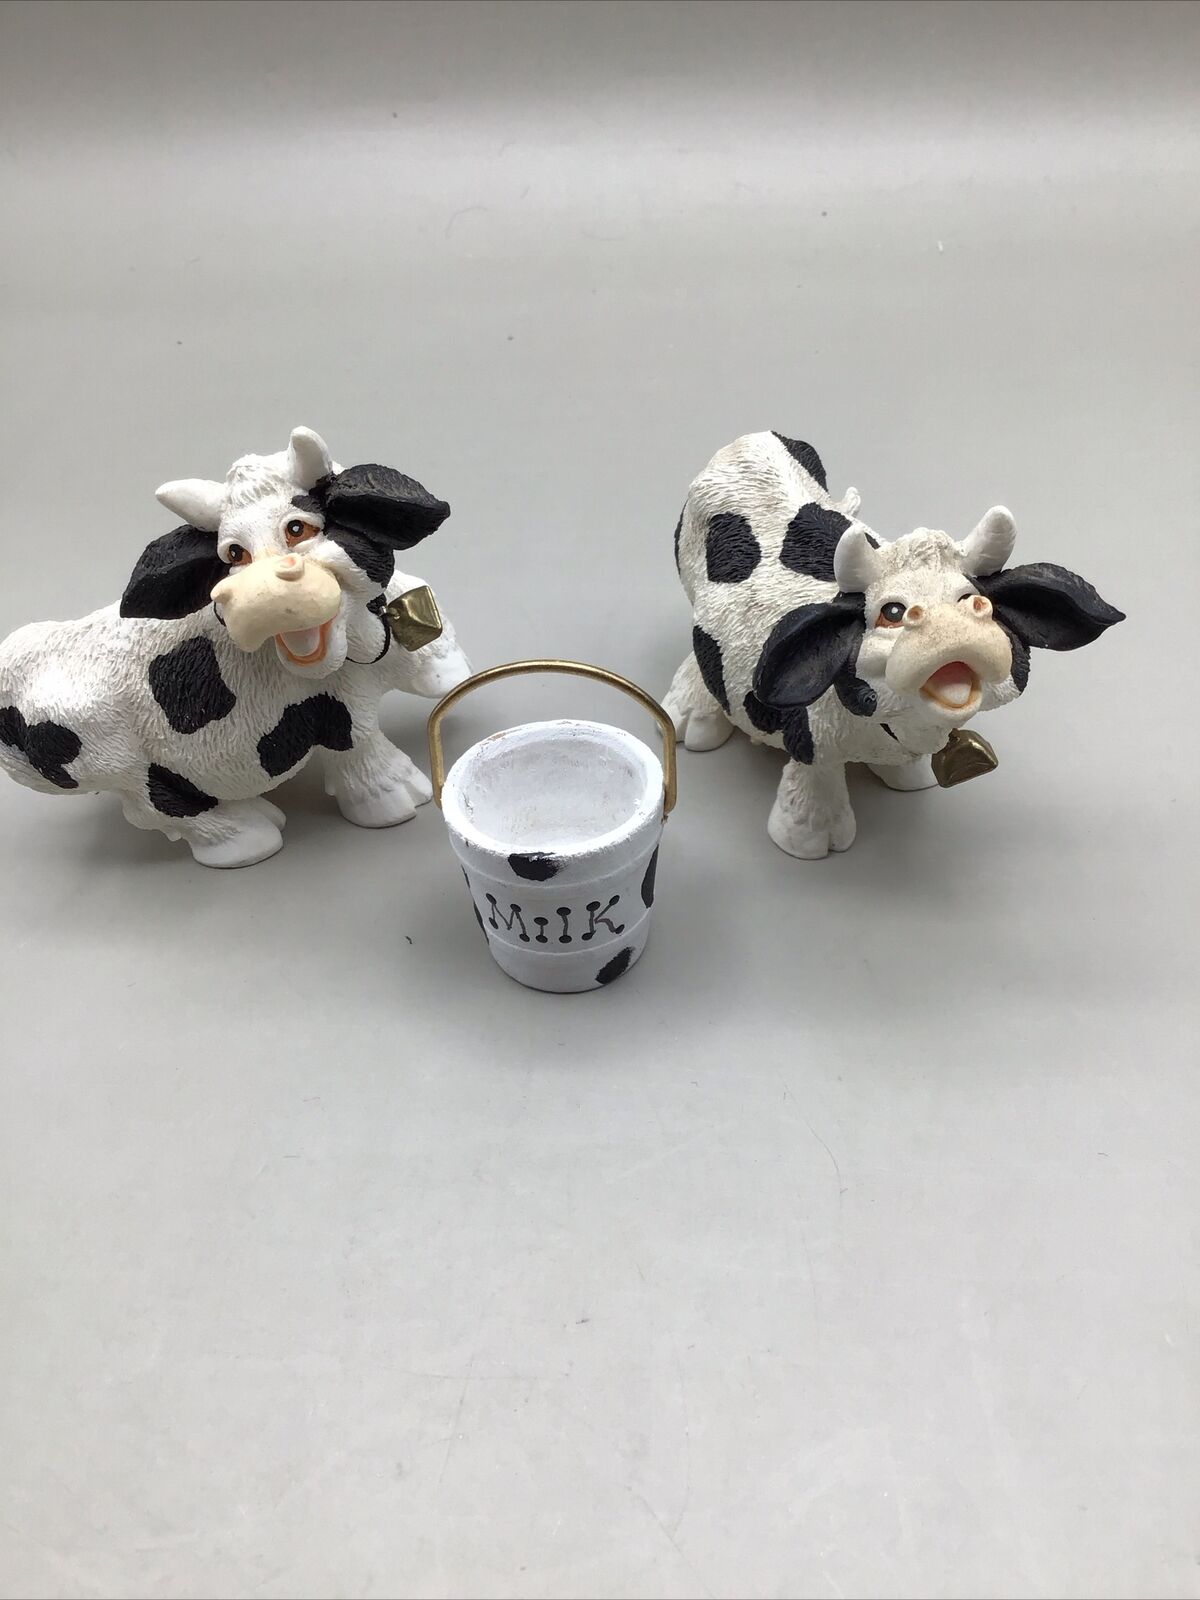 Two Cute Vintage Russ Miniature Country Cow Figurines With a Milk Pail